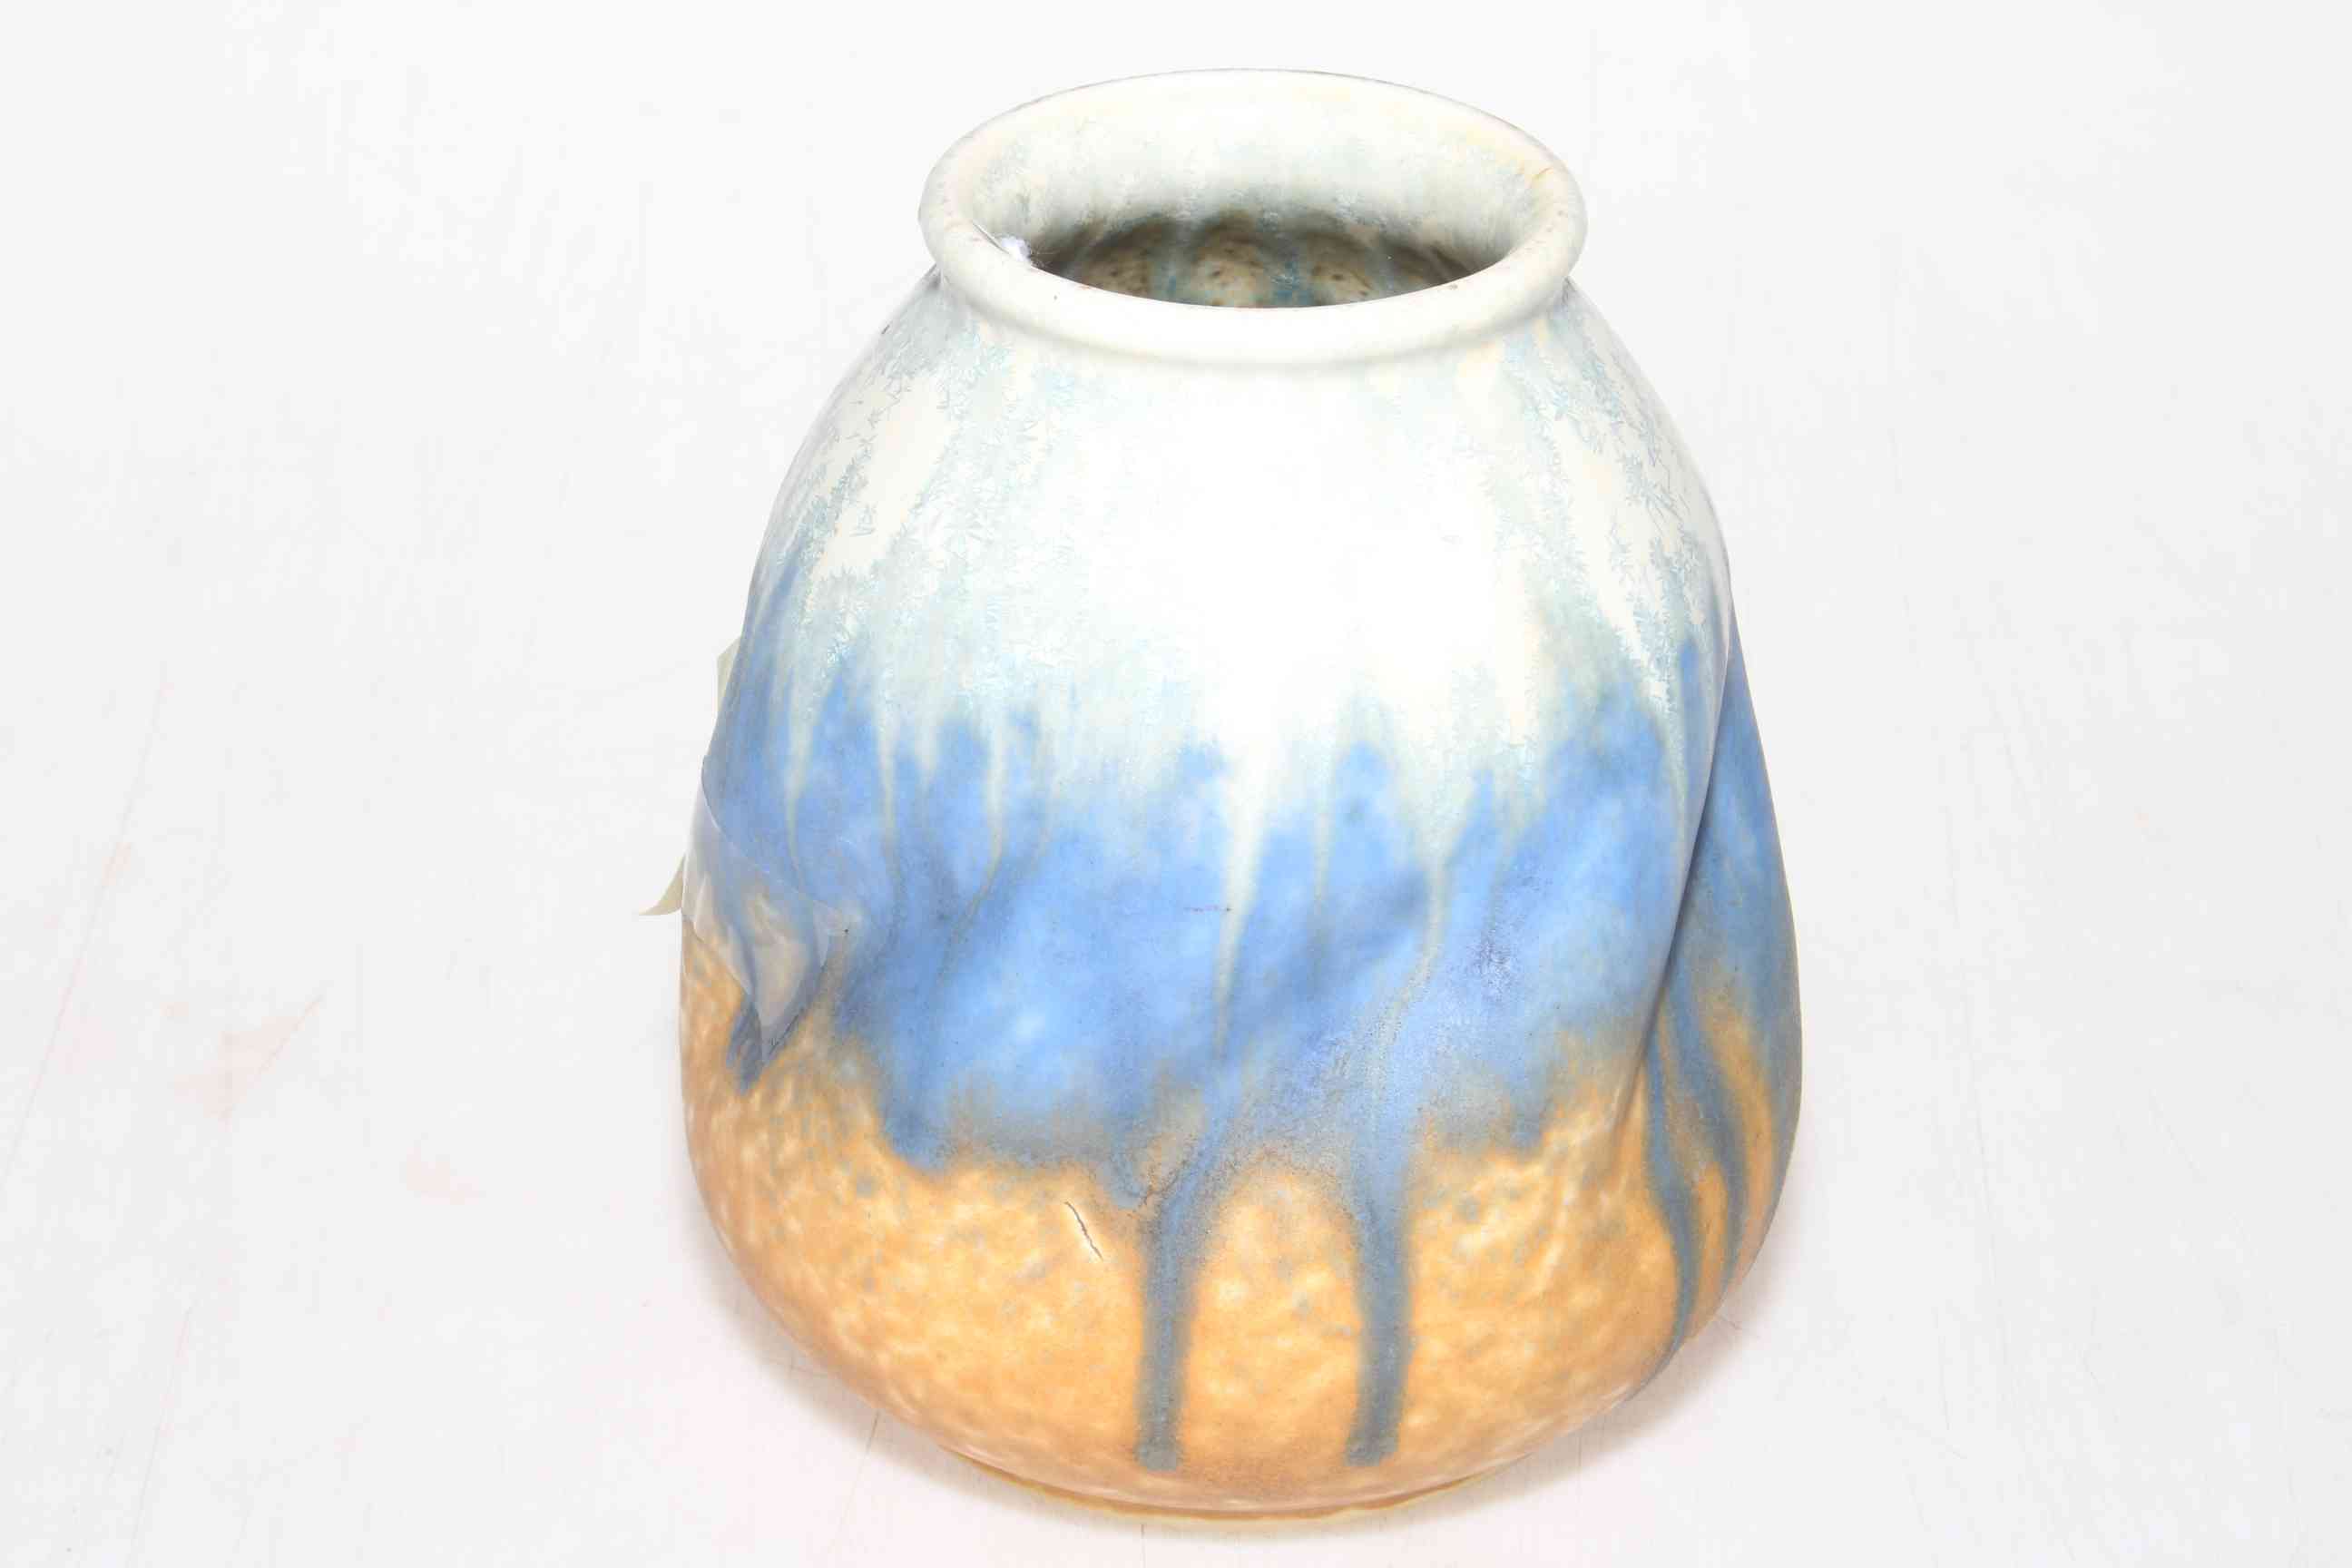 Ruskin Pottery dimple bodied vase with blue/orange drip design, 14cm high.